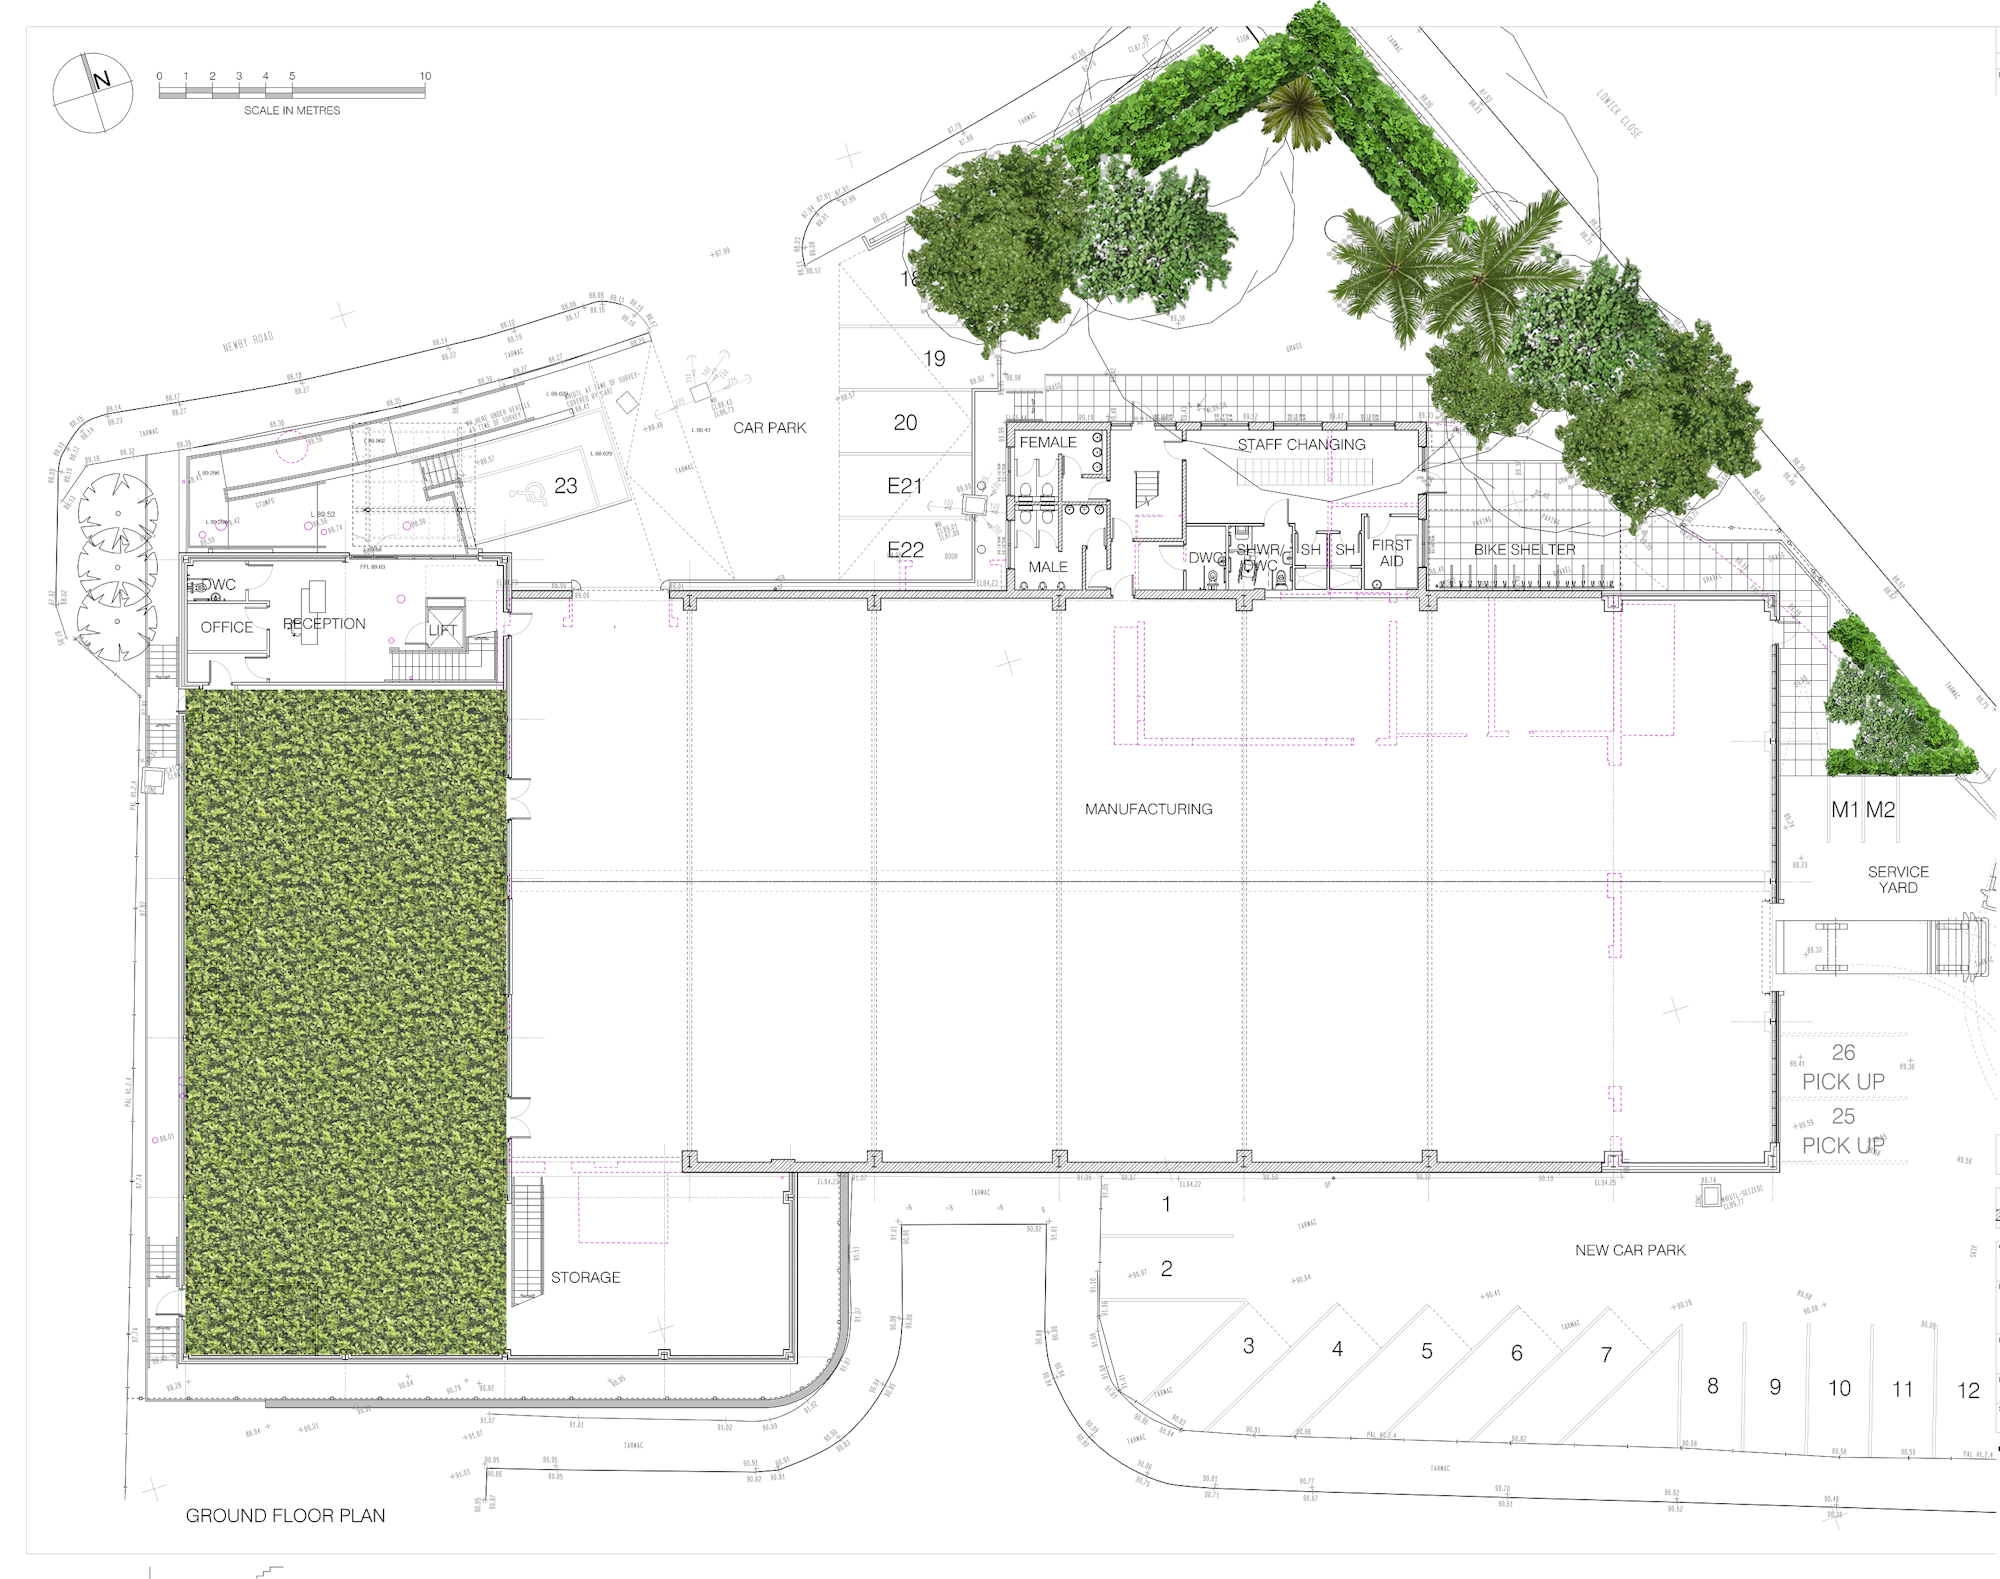 Plan view drawing of a building with green infrastructure proposed, including a green roof and perimeter planting